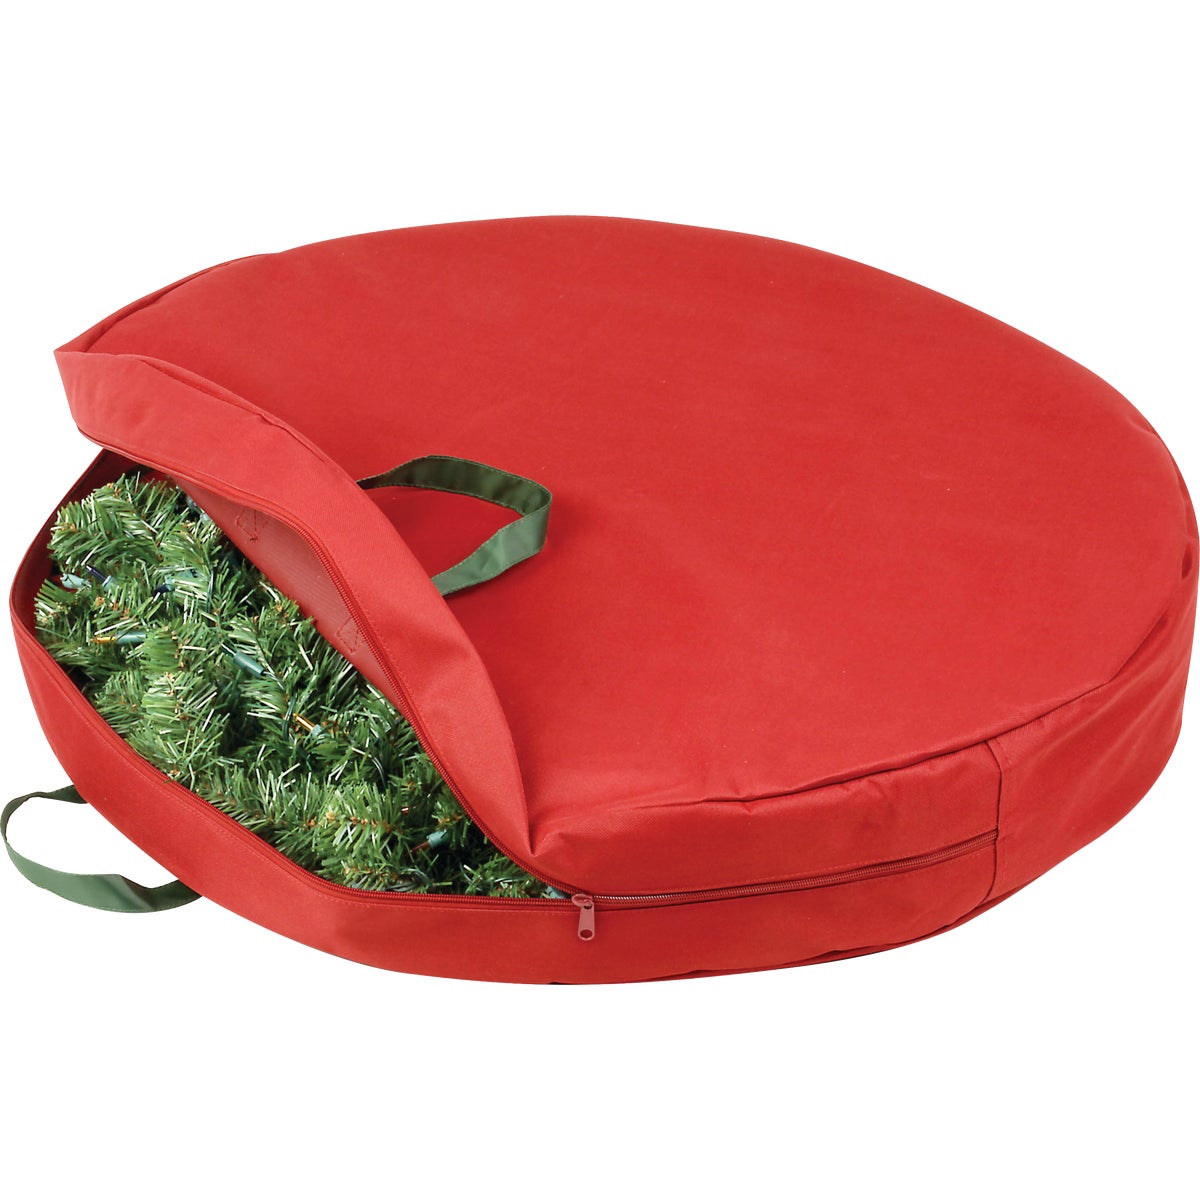 Item 932922, Zippered wreath storage bag with comfortable carrying handles keeps wreath 